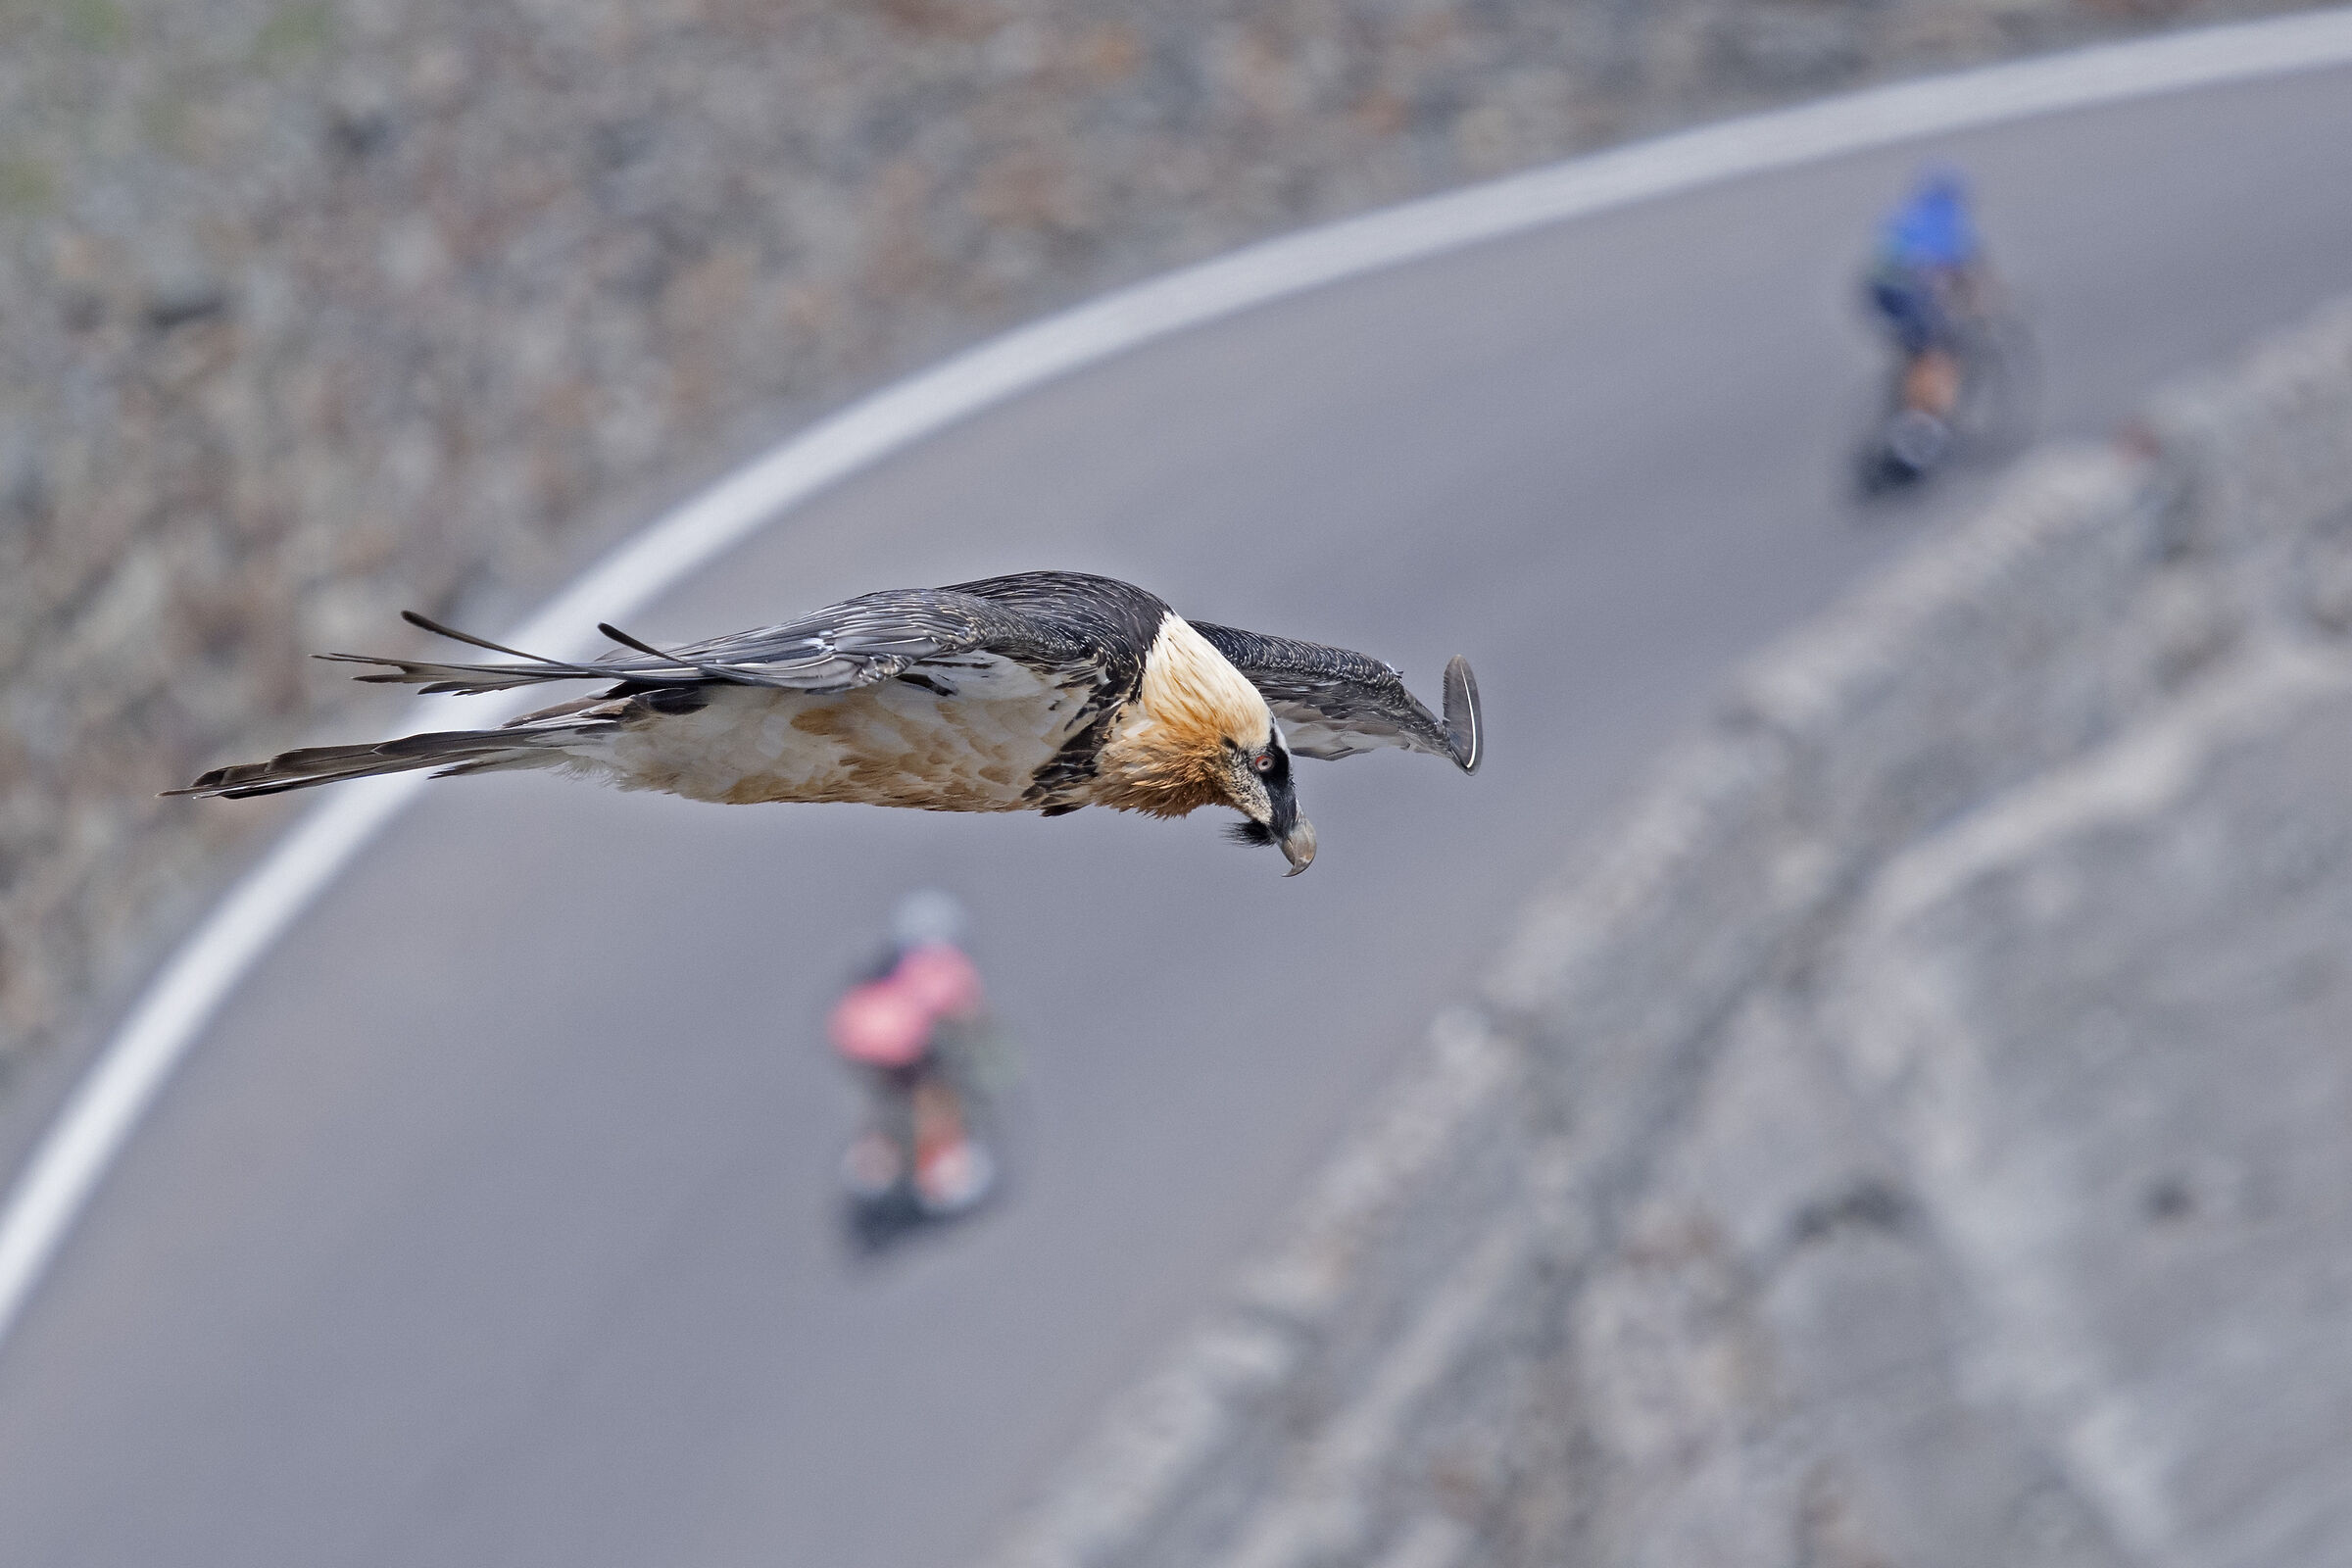 The Bearded Vulture of the Stelvio...